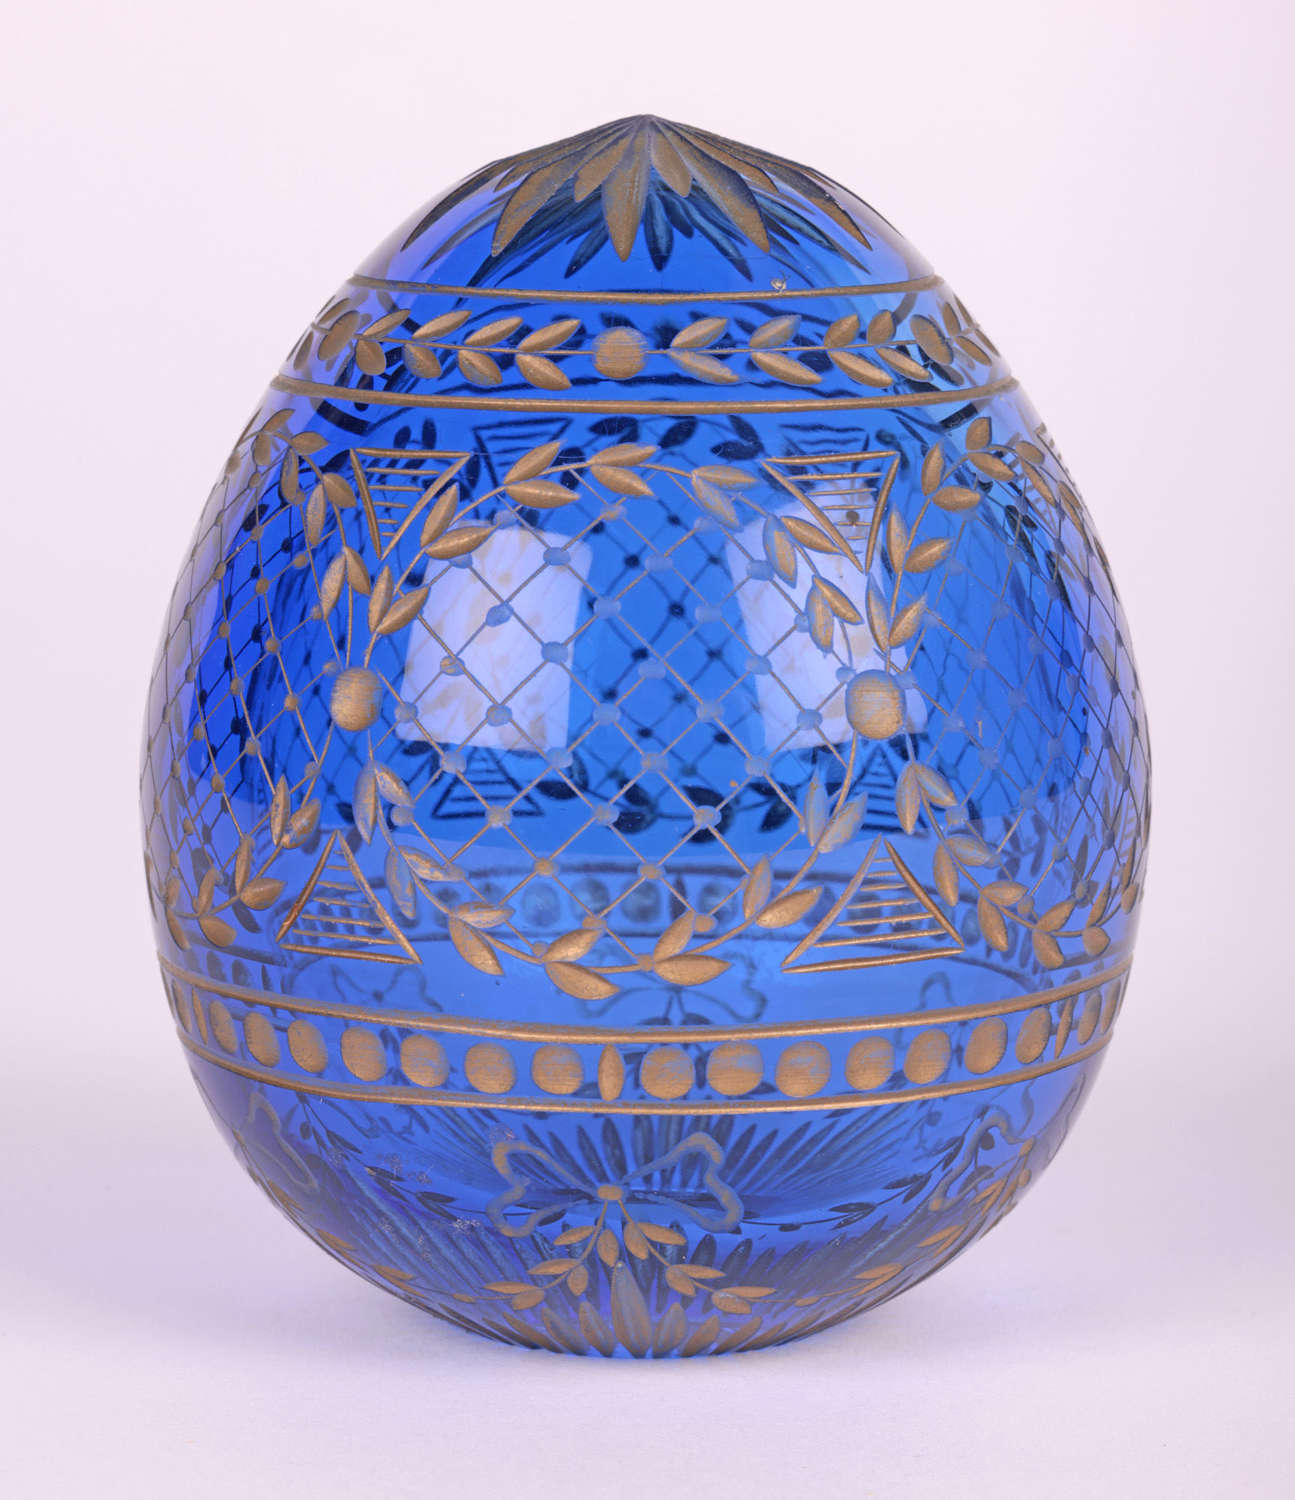 Russian Faberge Attributed Blue Glass Egg with Engraved Designs